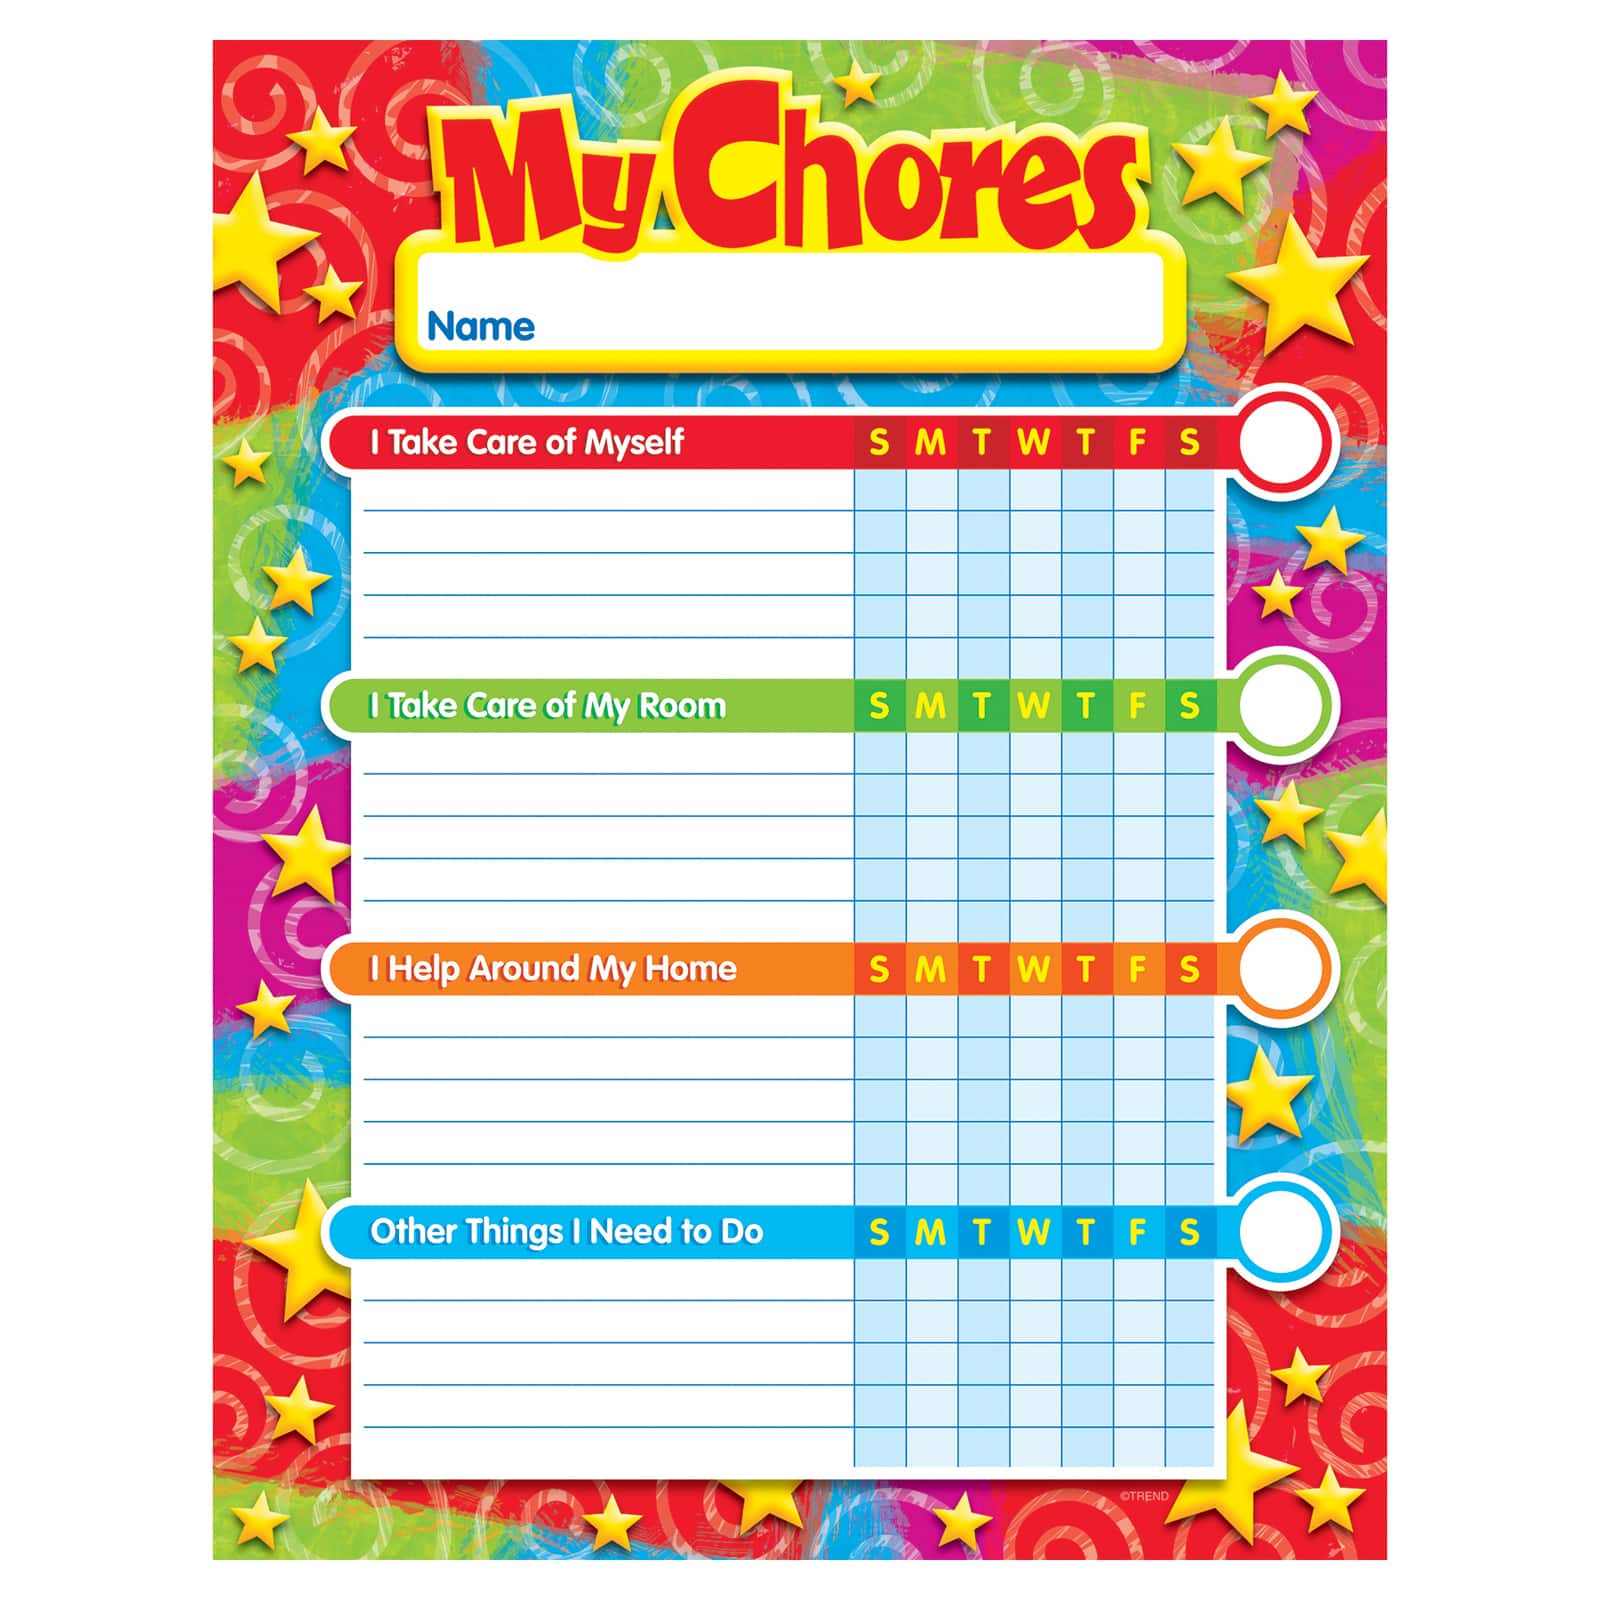 How To Make A Chore Chart For Your Child